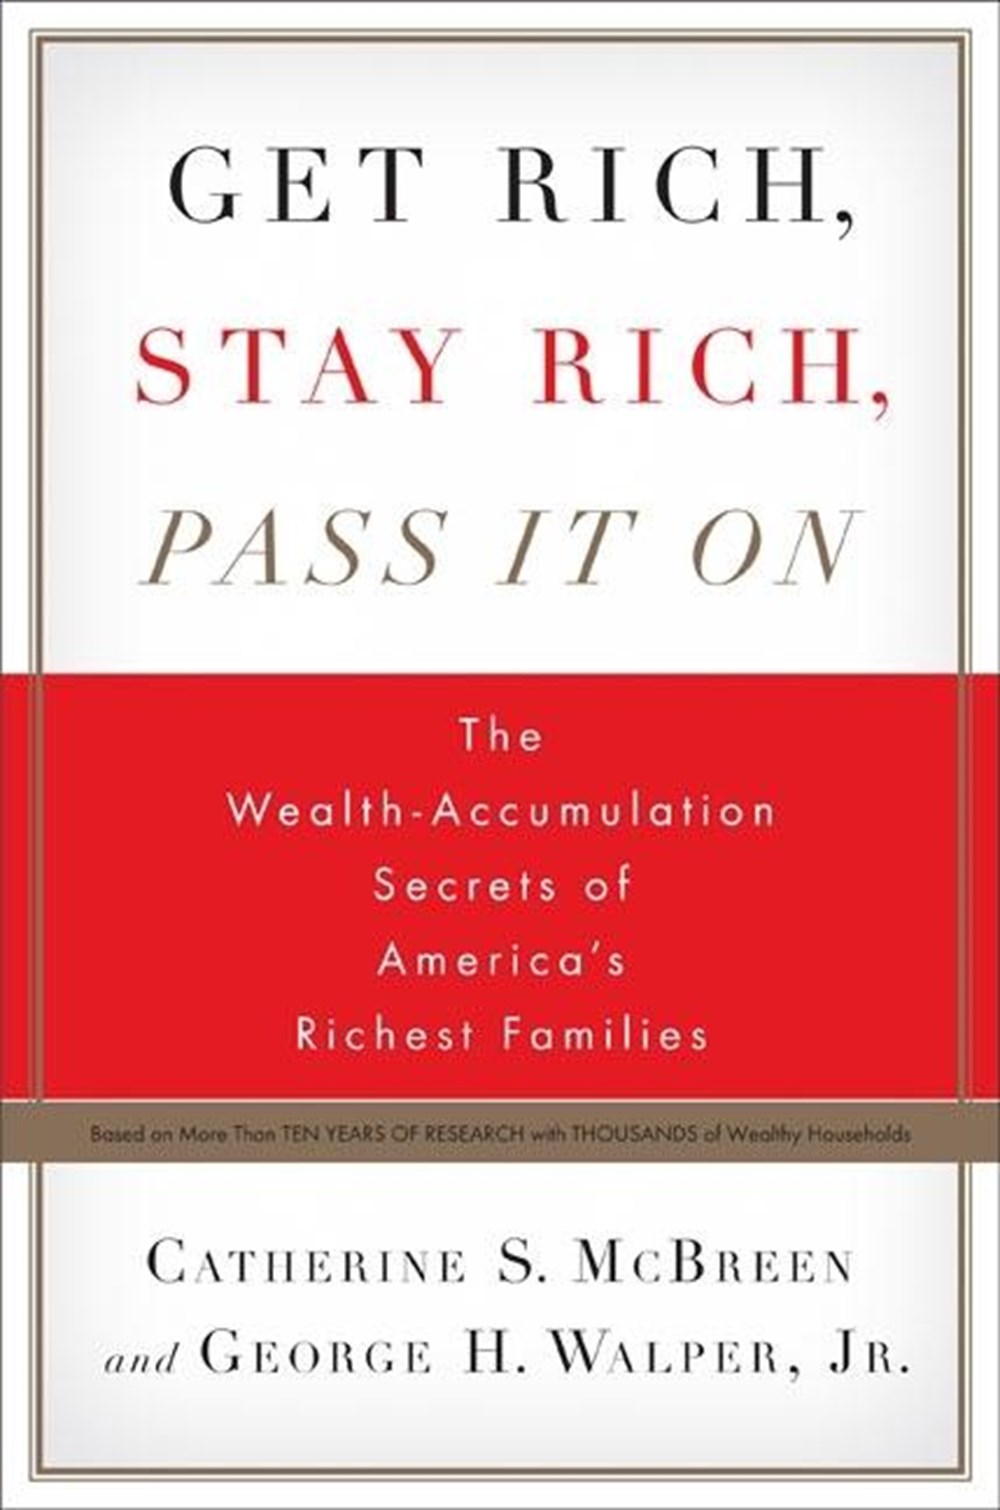 Get Rich, Stay Rich, Pass It on: The Wealth Accumulation Secrets of America's Richest Families